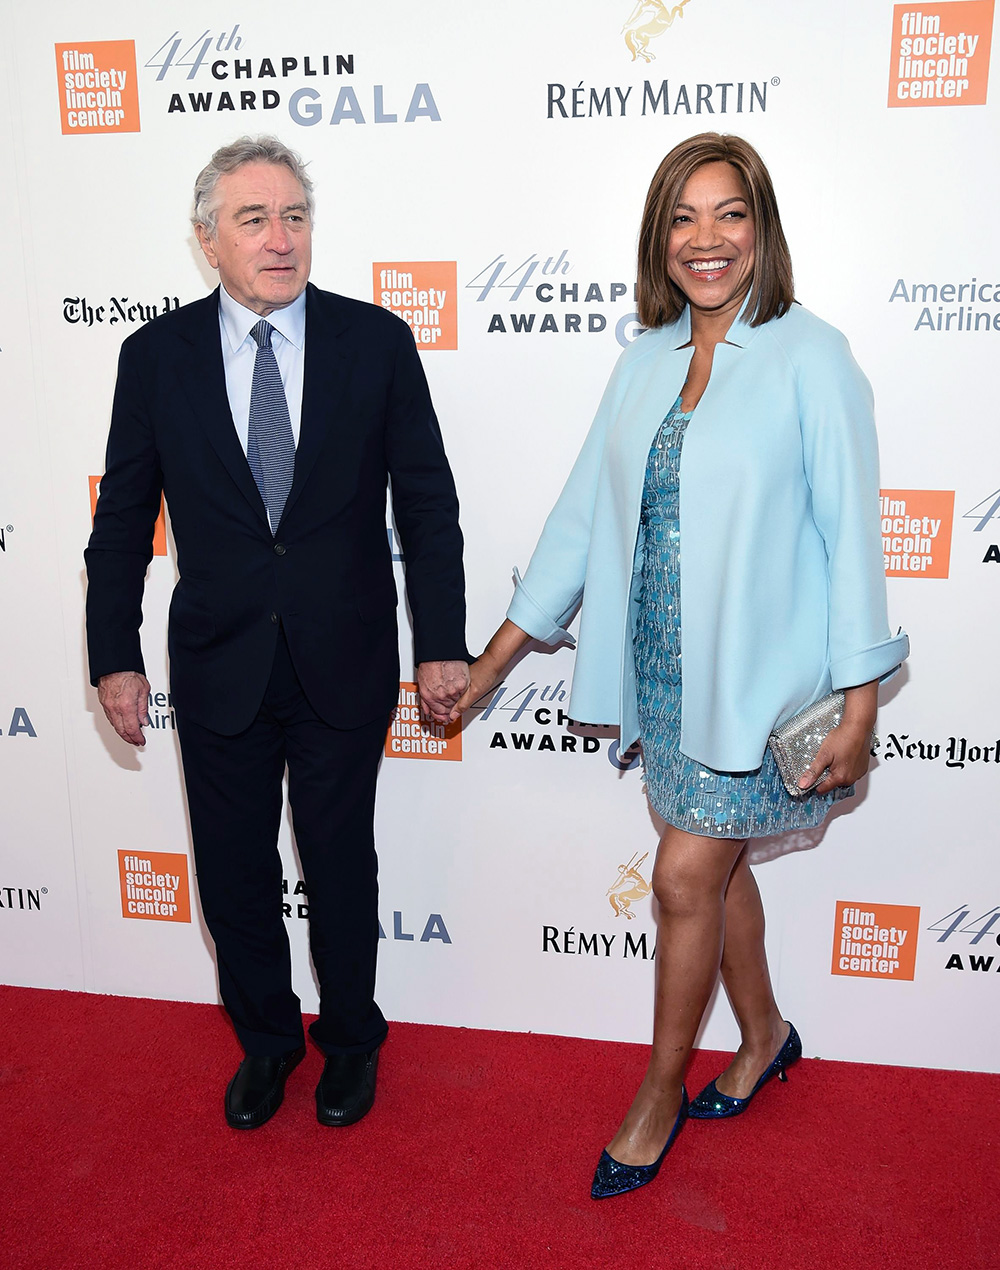 <p>Robert De Niro held hands with his wife Grace Hightower at the 2017 Chaplin Awards. While Robert sported a classic suit, his wife stunned in light blue.</p>